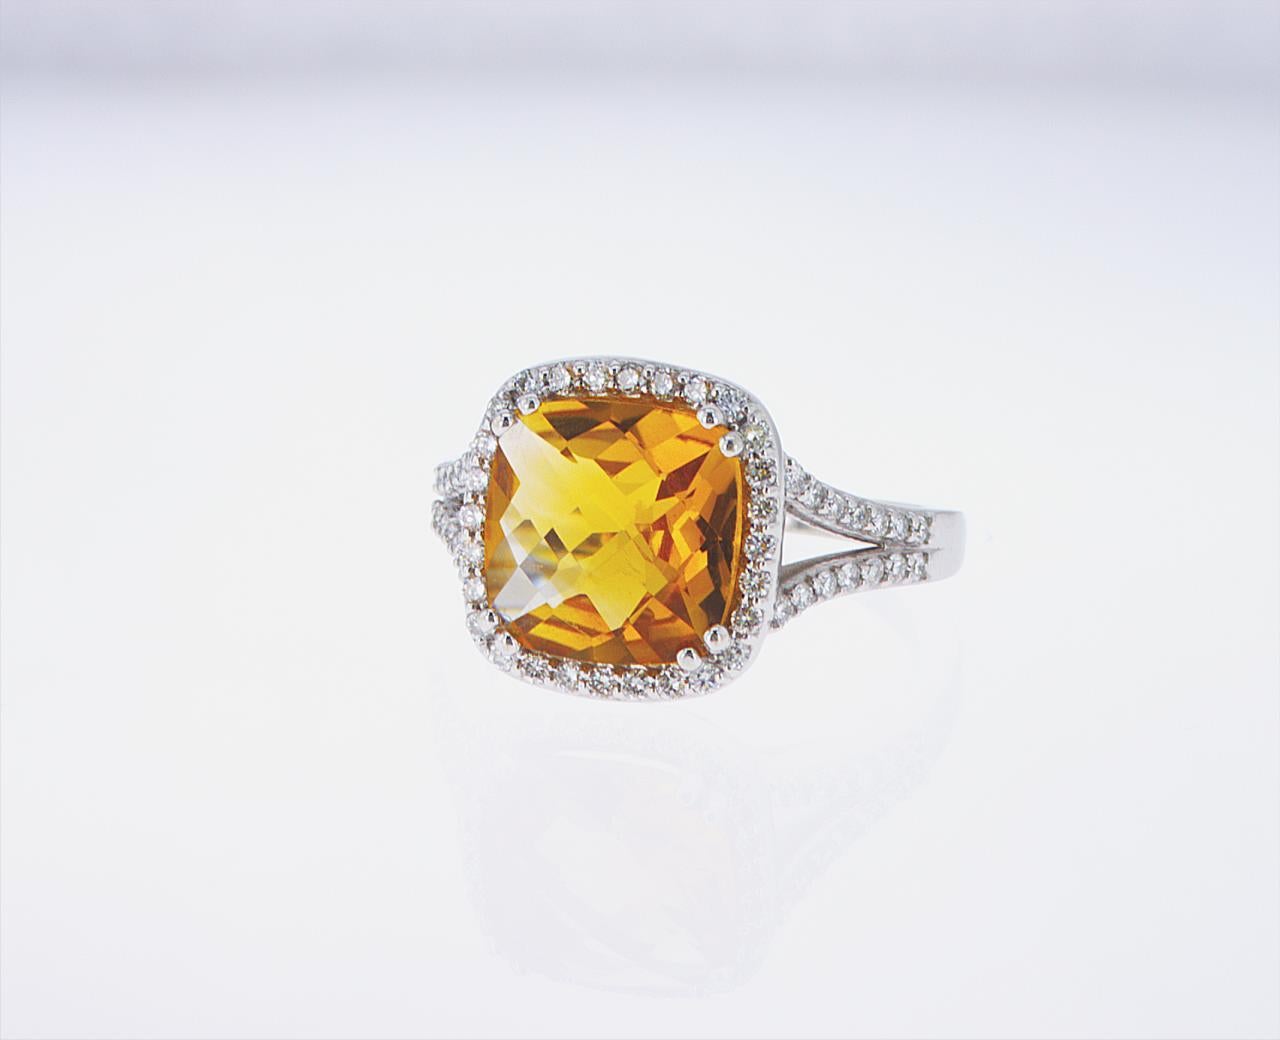 3.23ct Cushion Cut Citrine center set in a 14k White Gold mounting with 0.40ct total weight of accent diamonds.